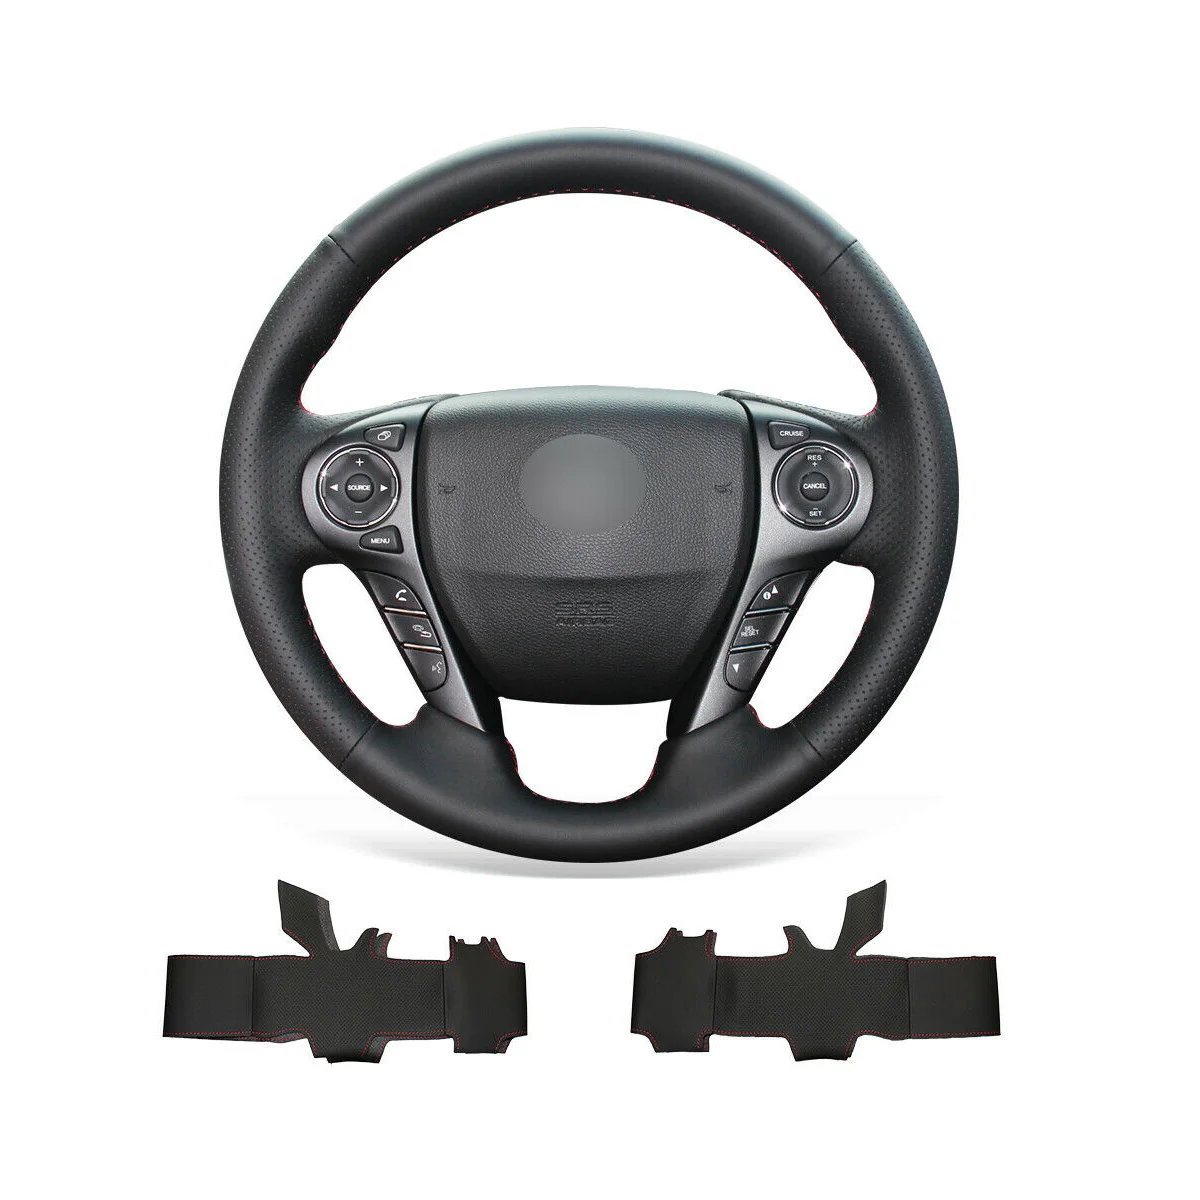 

DIY Hand Stitched Soft Non-slip Black Leather Steering Wheel Cover For Honda Accord 9 Pilot Ridgeline